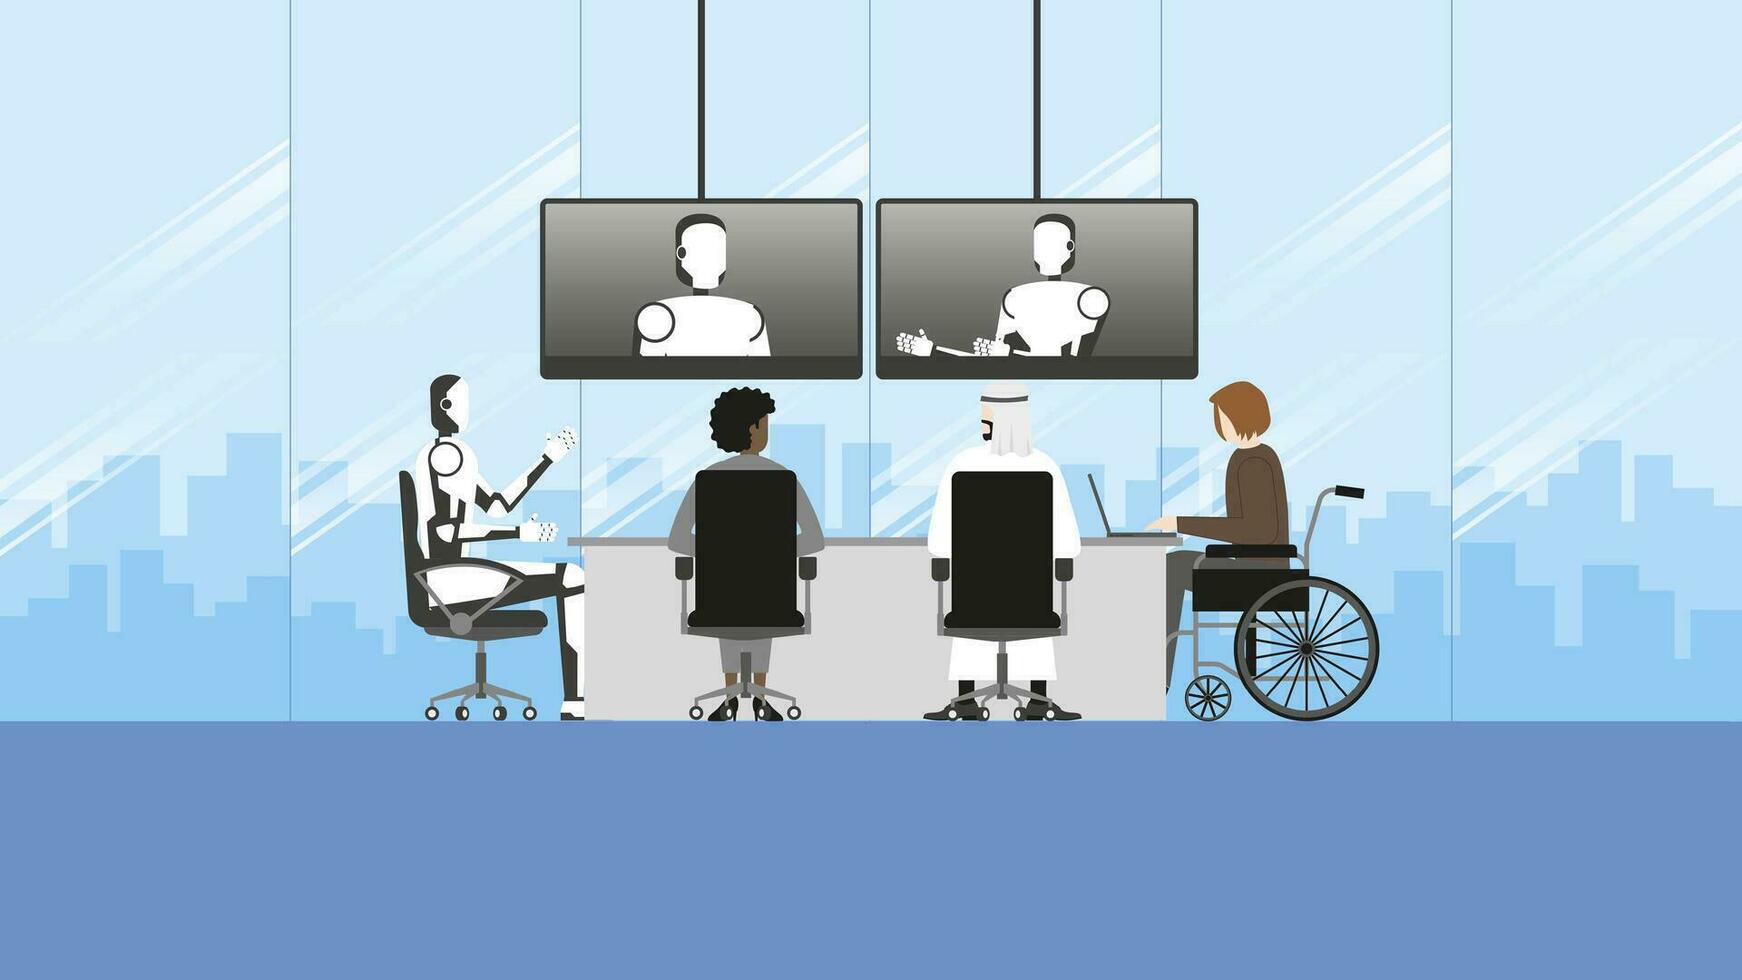 Diversity businesspeople and robot colleague in the office meeting room. Teleconference vector